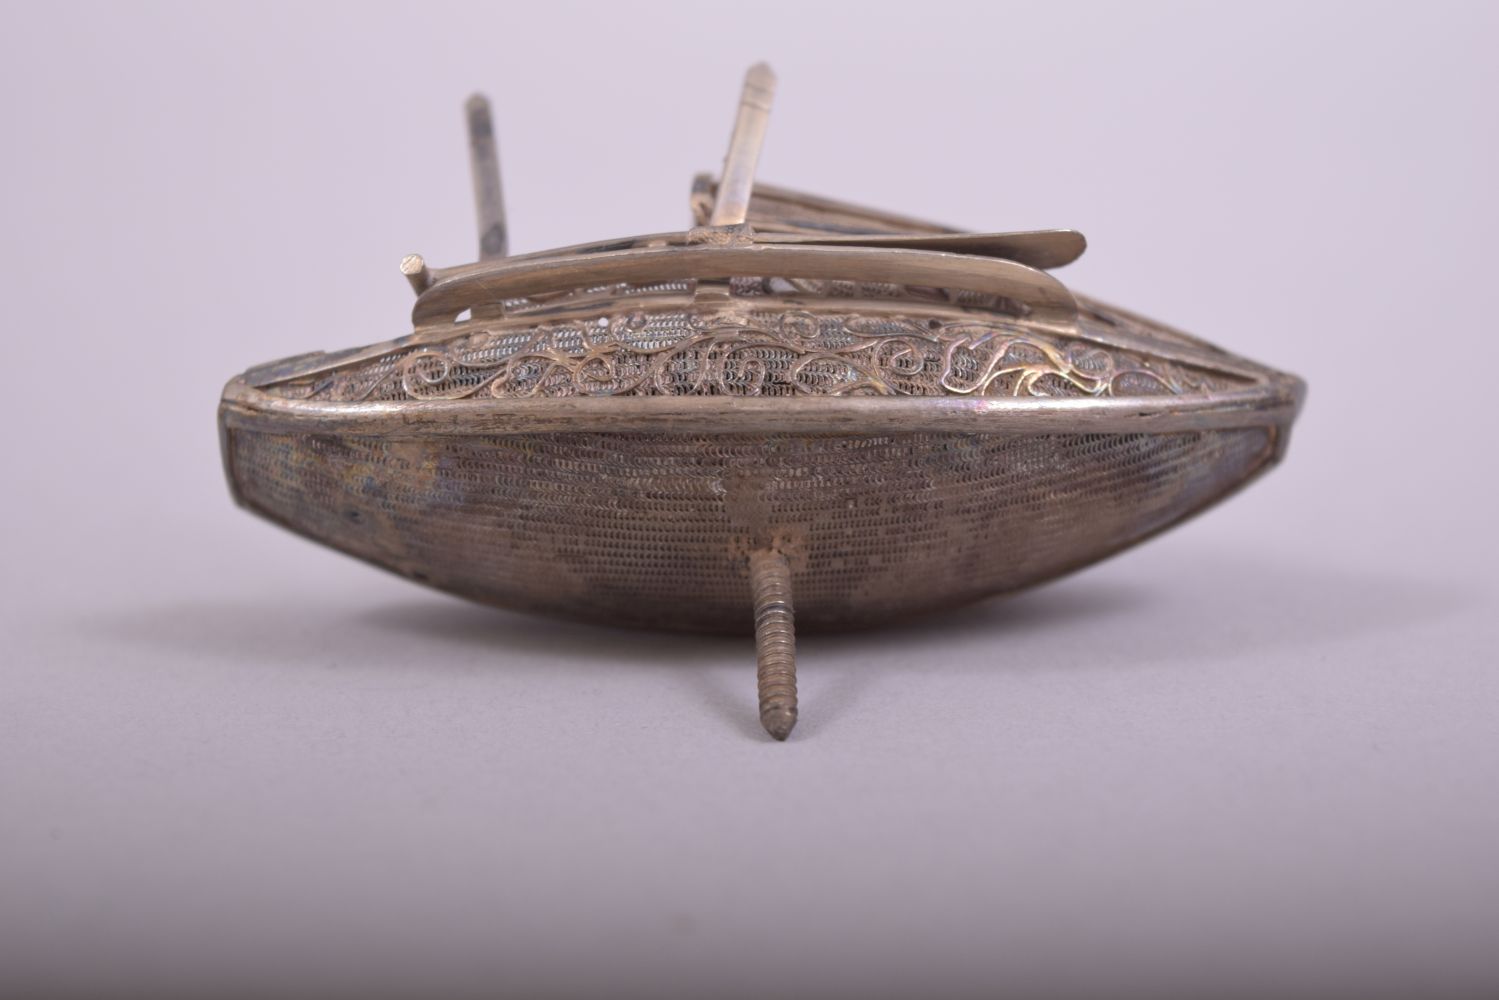 A SMALL CHINESE FILIGREE MODEL OF A JUNK, on a wooden stand, 7.5cm long. - Image 5 of 7